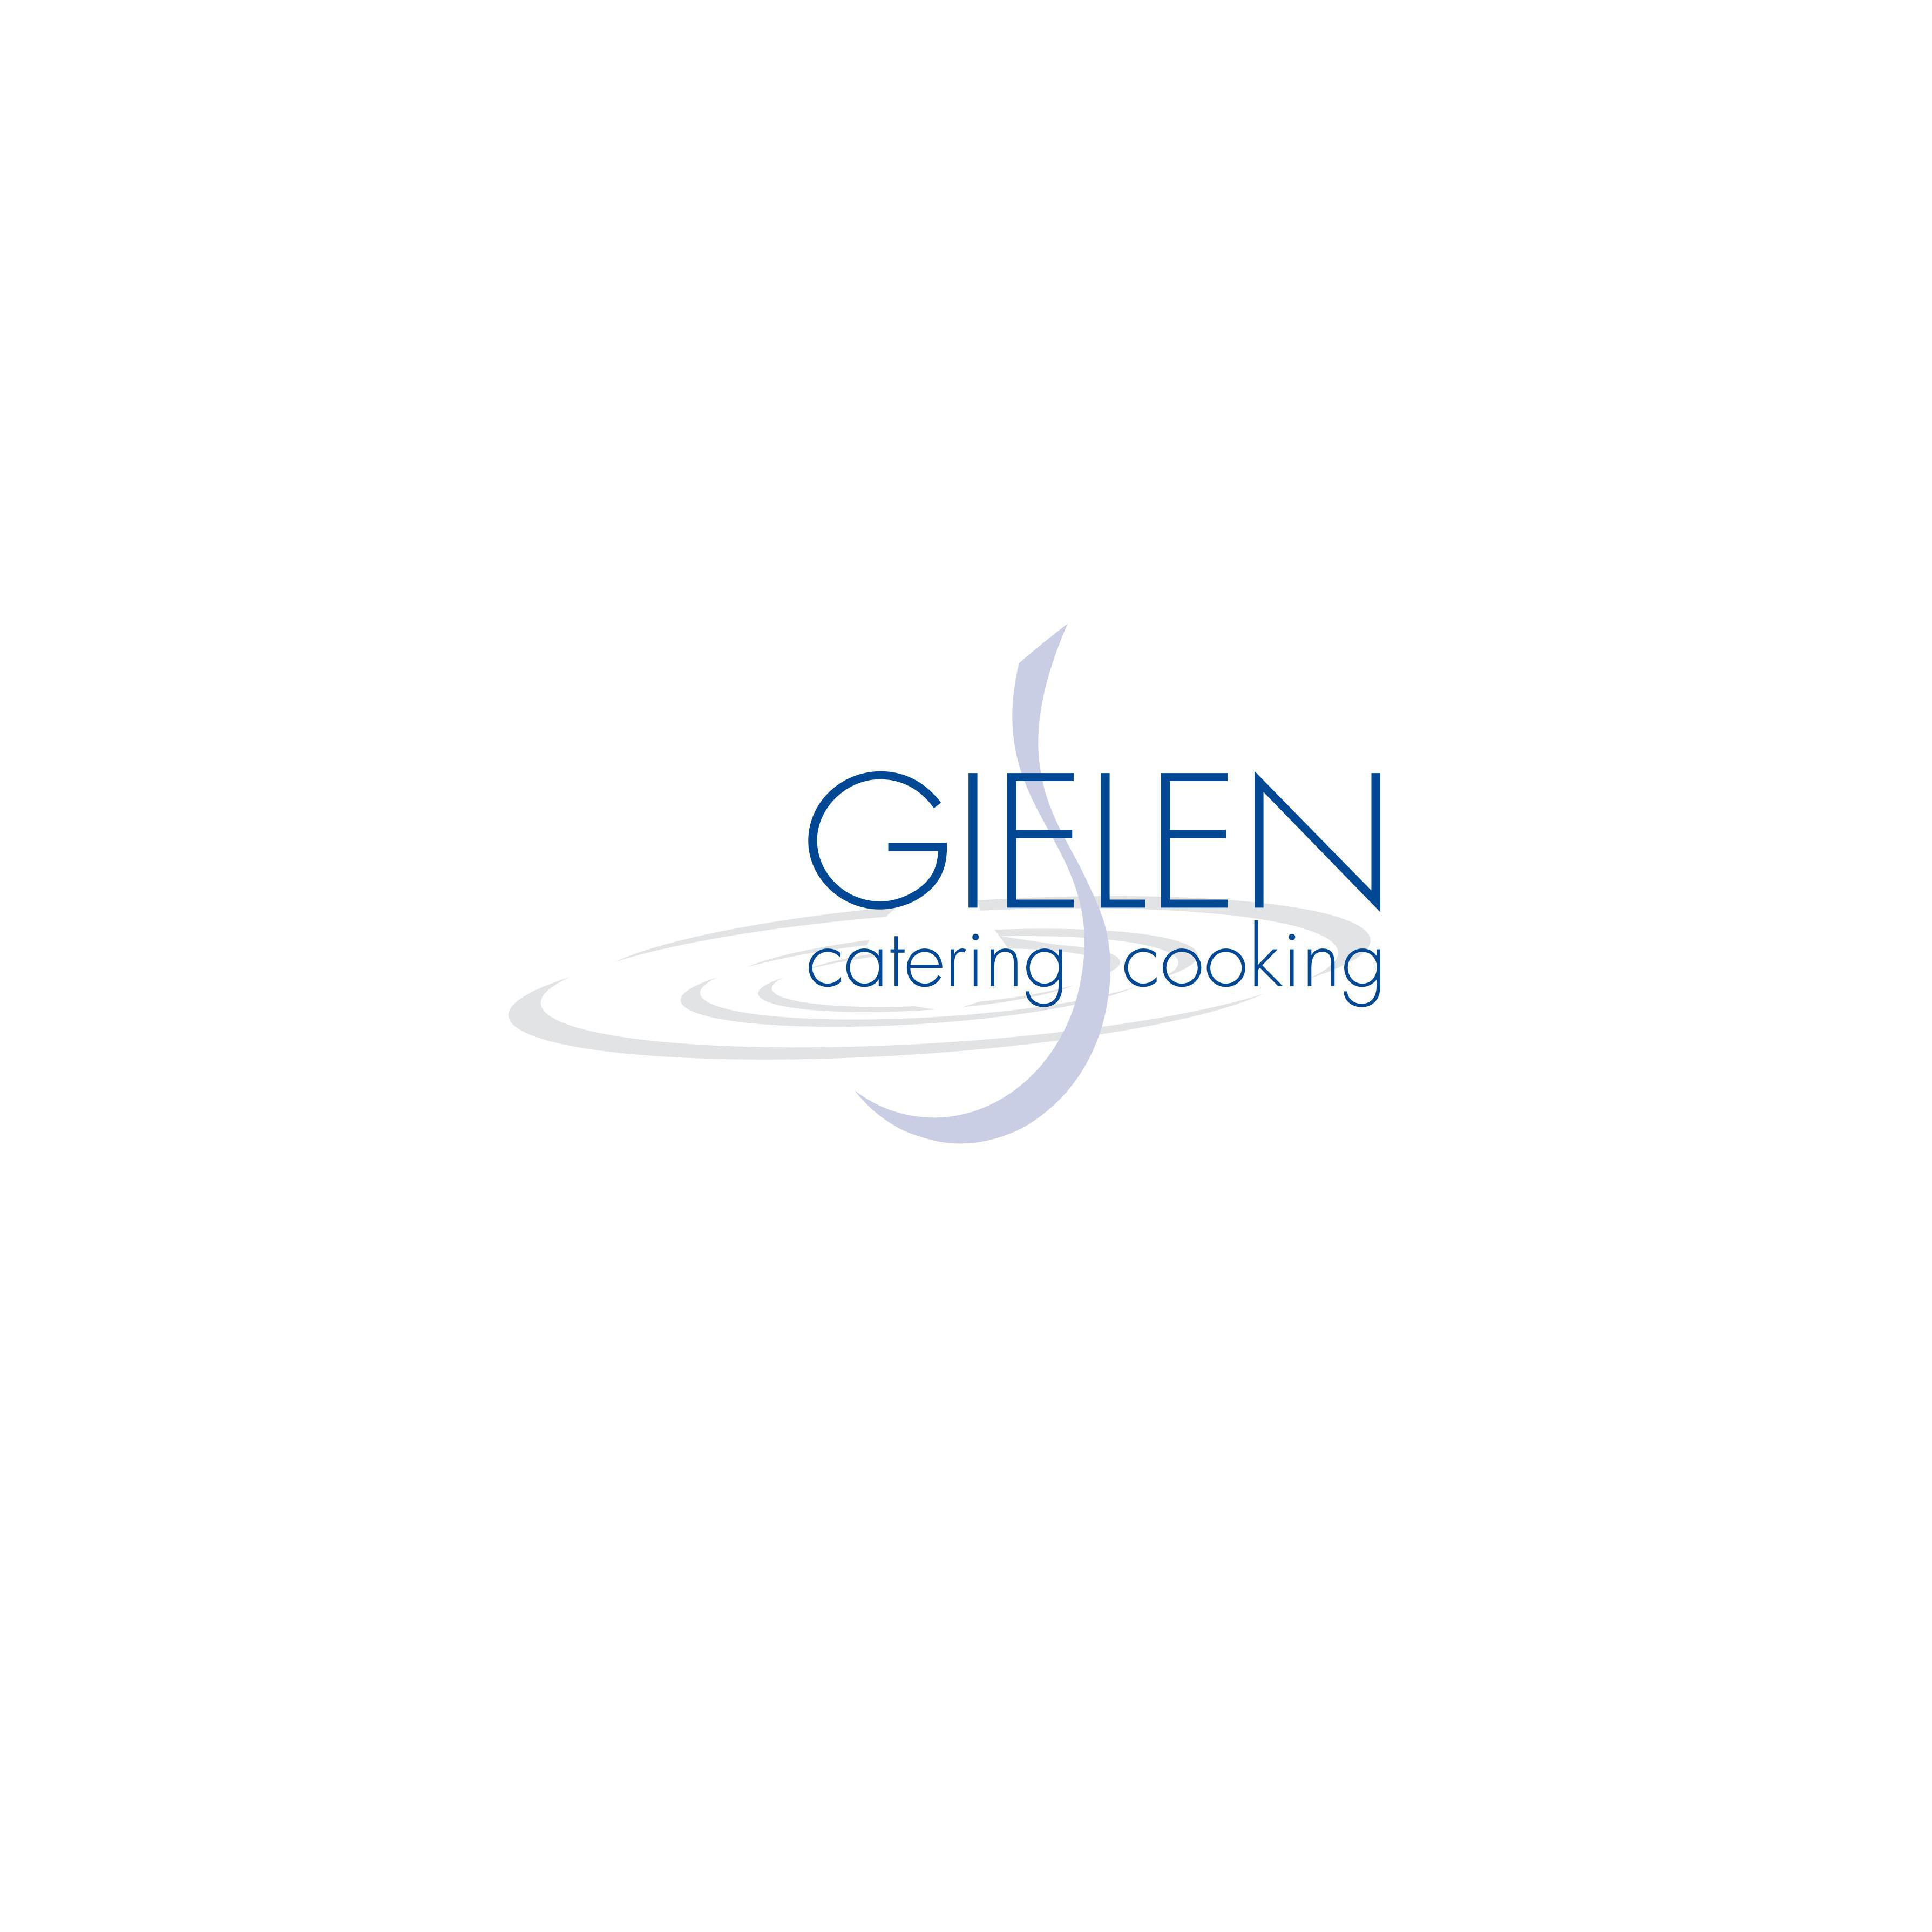 Gielen Catering & Cooking Logo